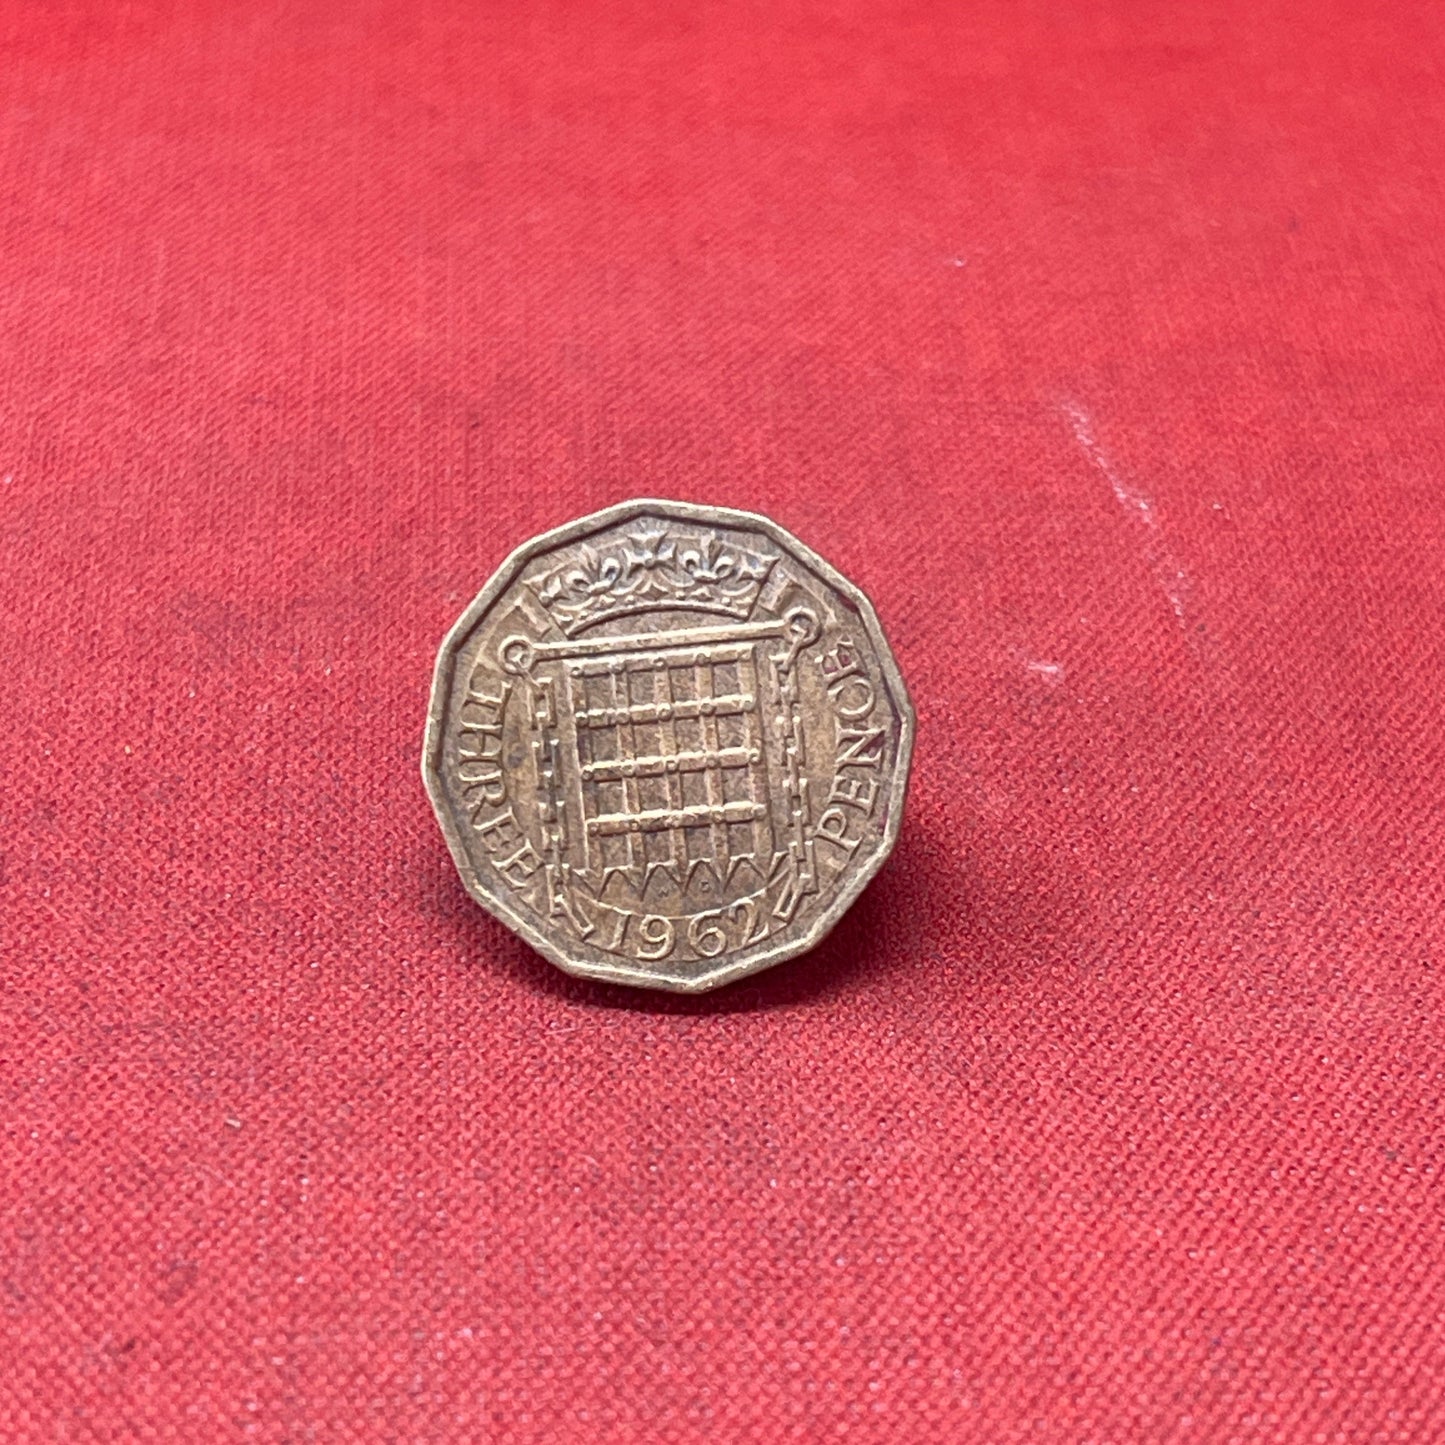 British  Threepence, Thruppence, or Thruppenny Bit